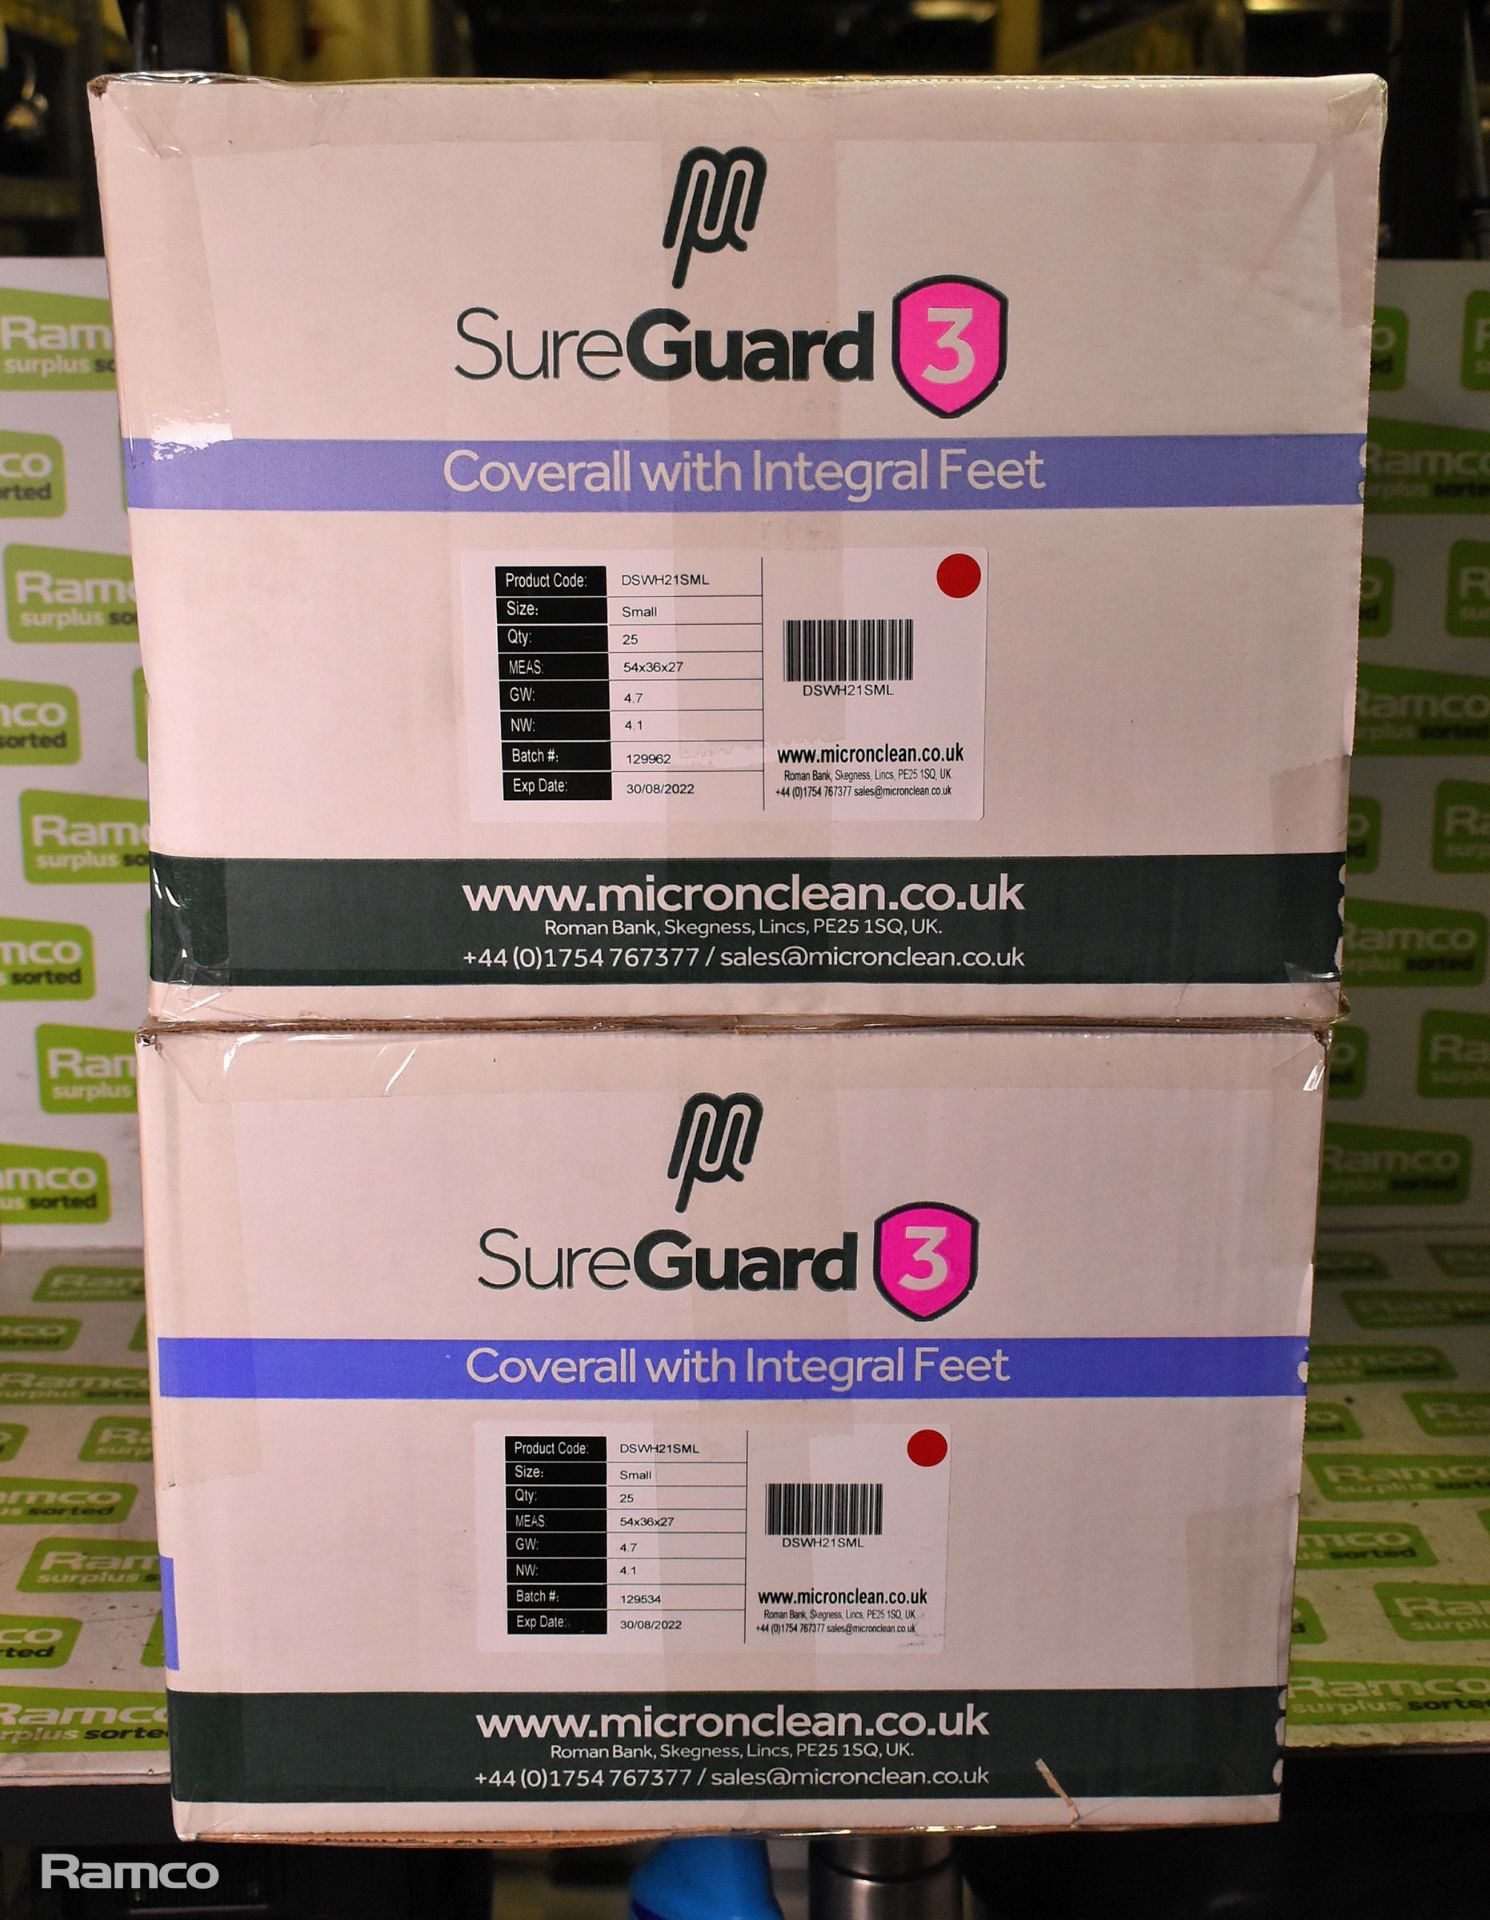 2x boxes of MicroClean SureGuard 3 coveralls - size small with integral feet - 25 units per box - Bild 2 aus 3